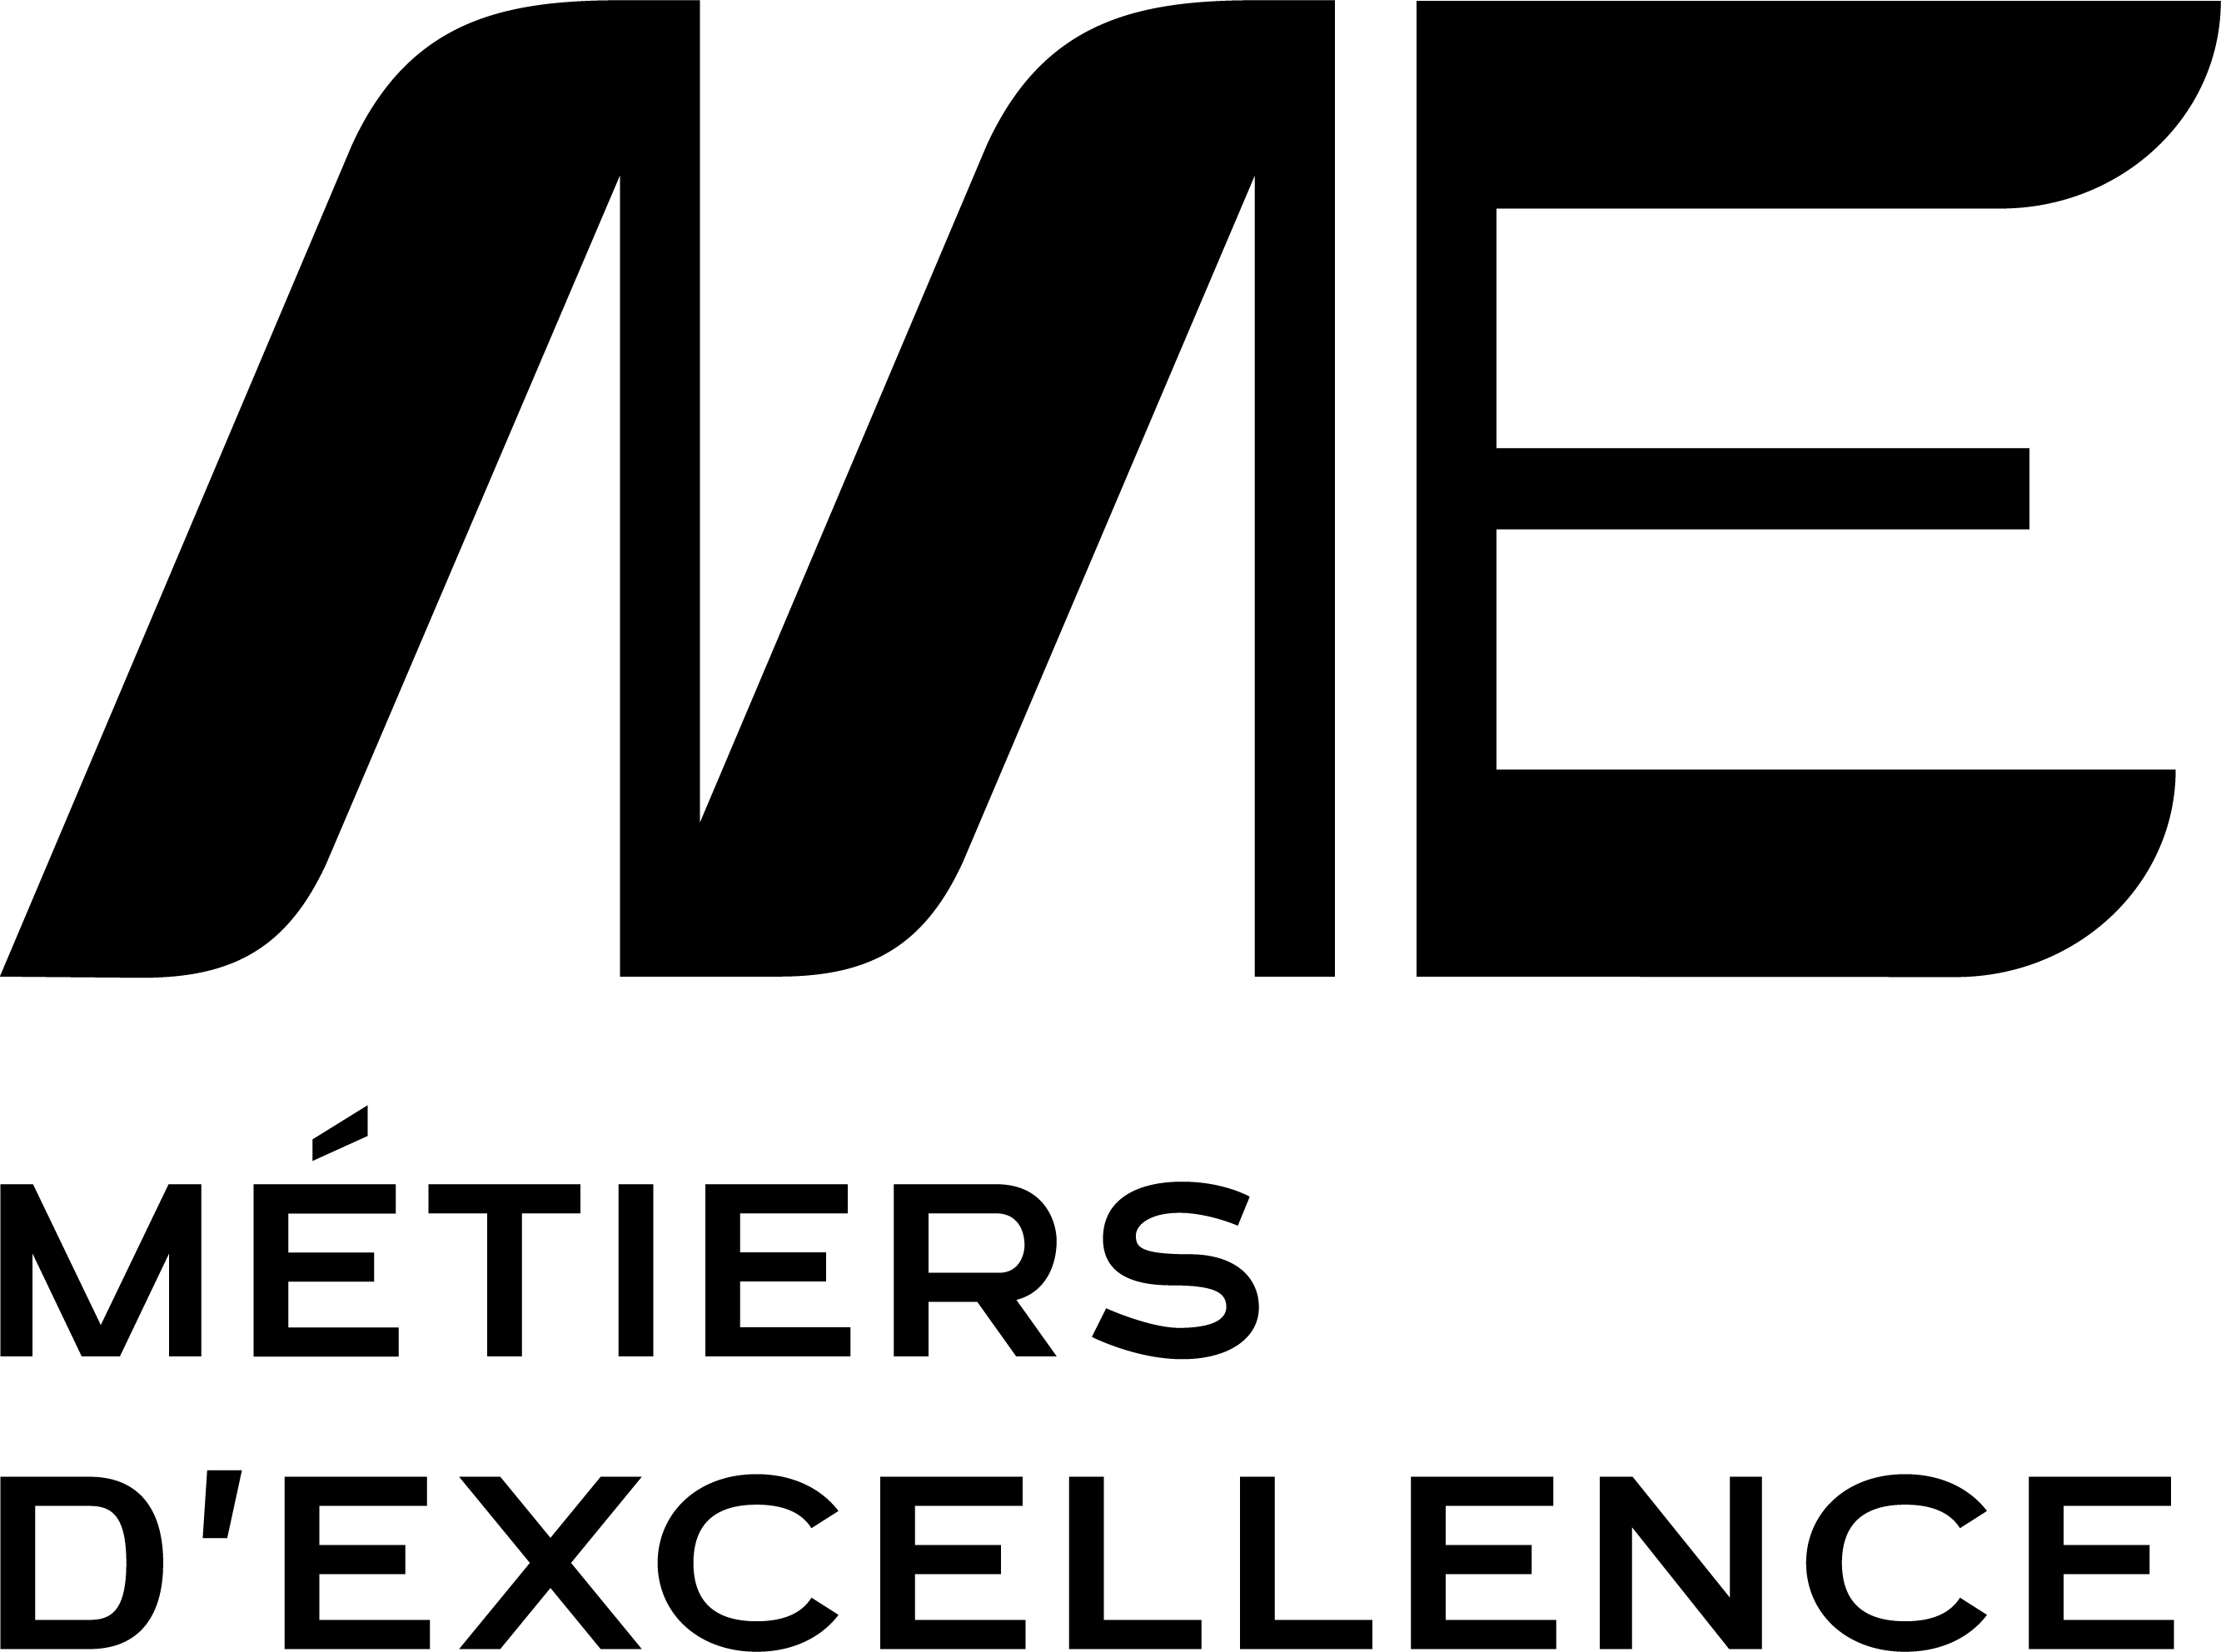 Métiers d'Excellence LVMH shine in Italy at SHOW ME event - LVMH